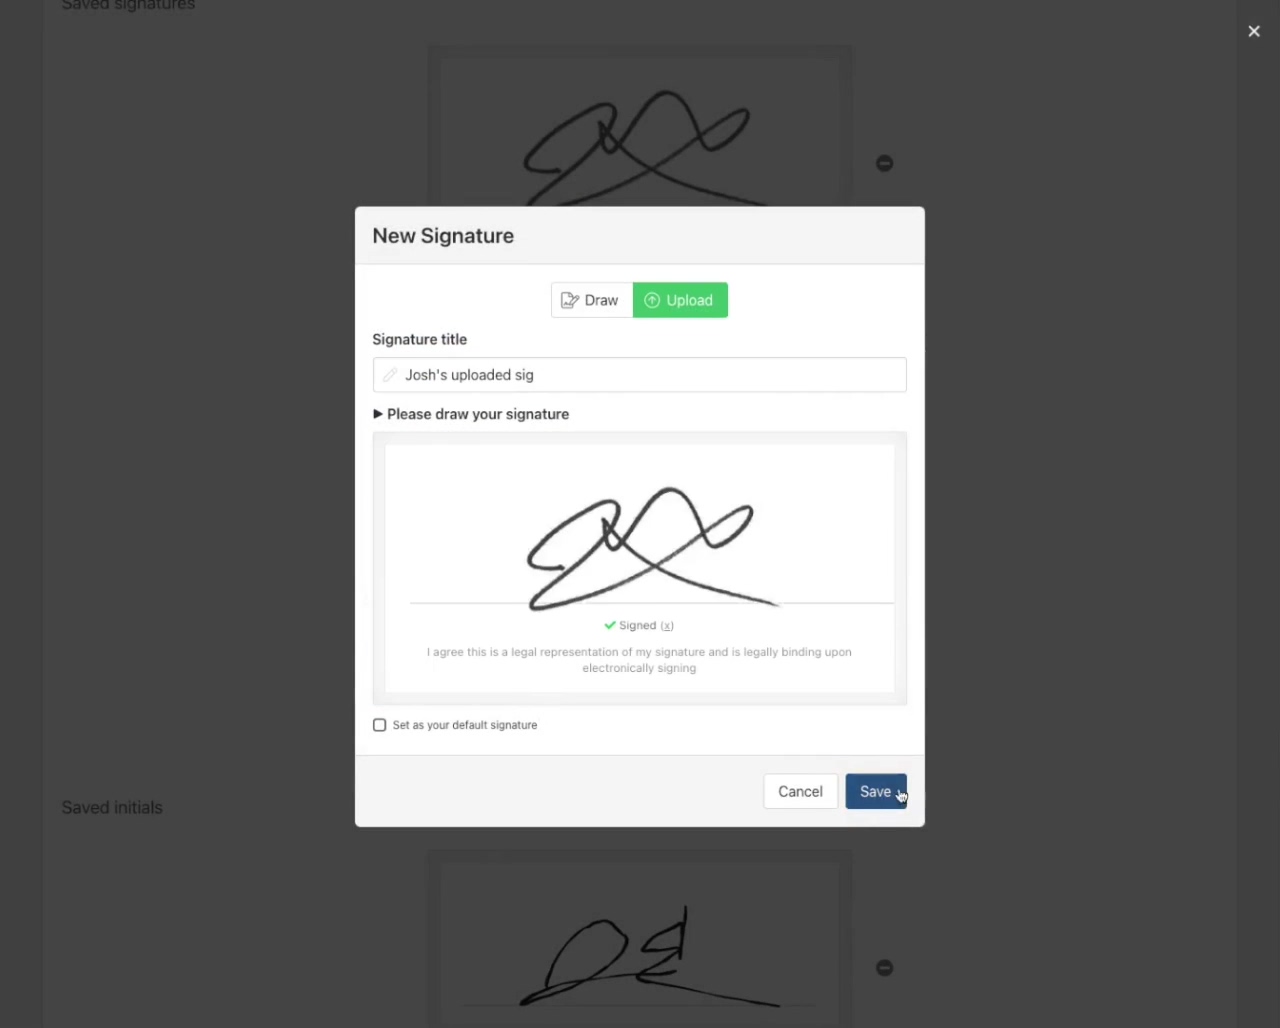 Saving signatures and initials - draw and upload